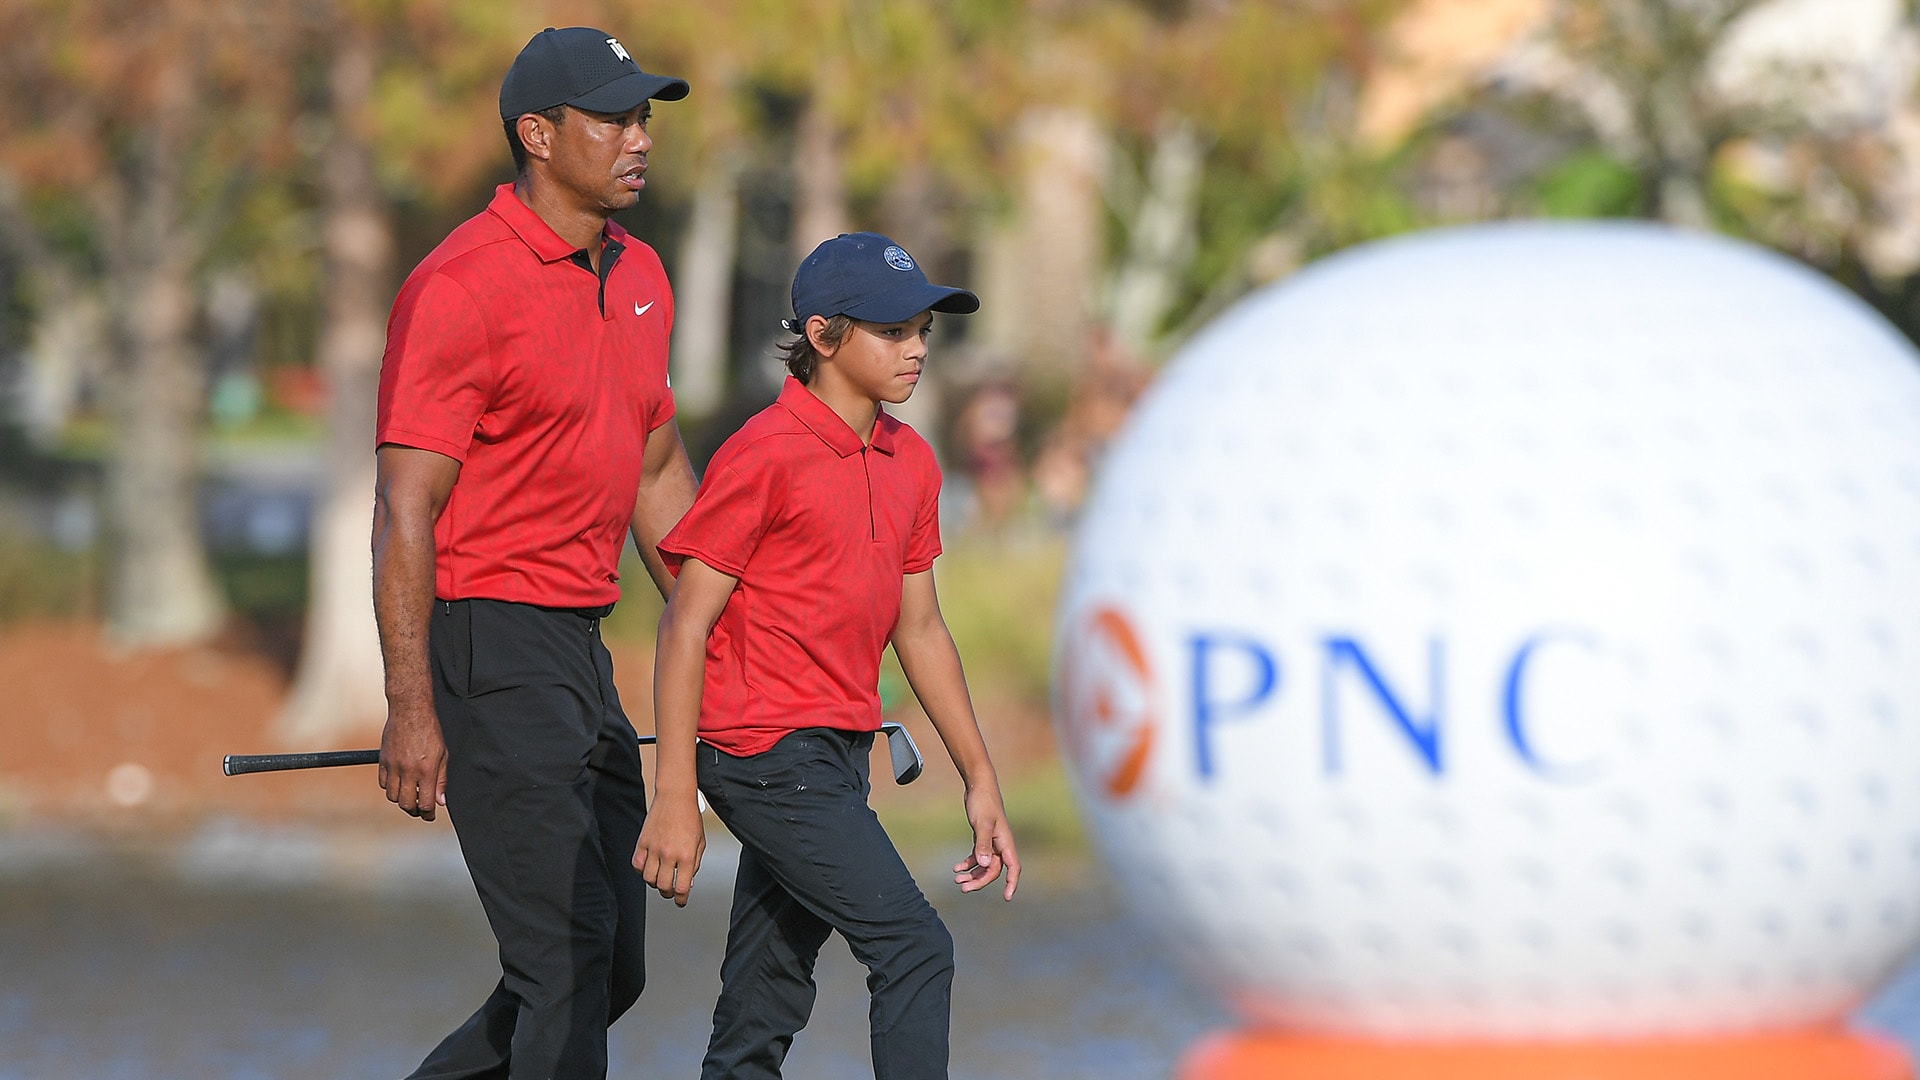 Look back on the best moments from Team Woods at the PNC Championship